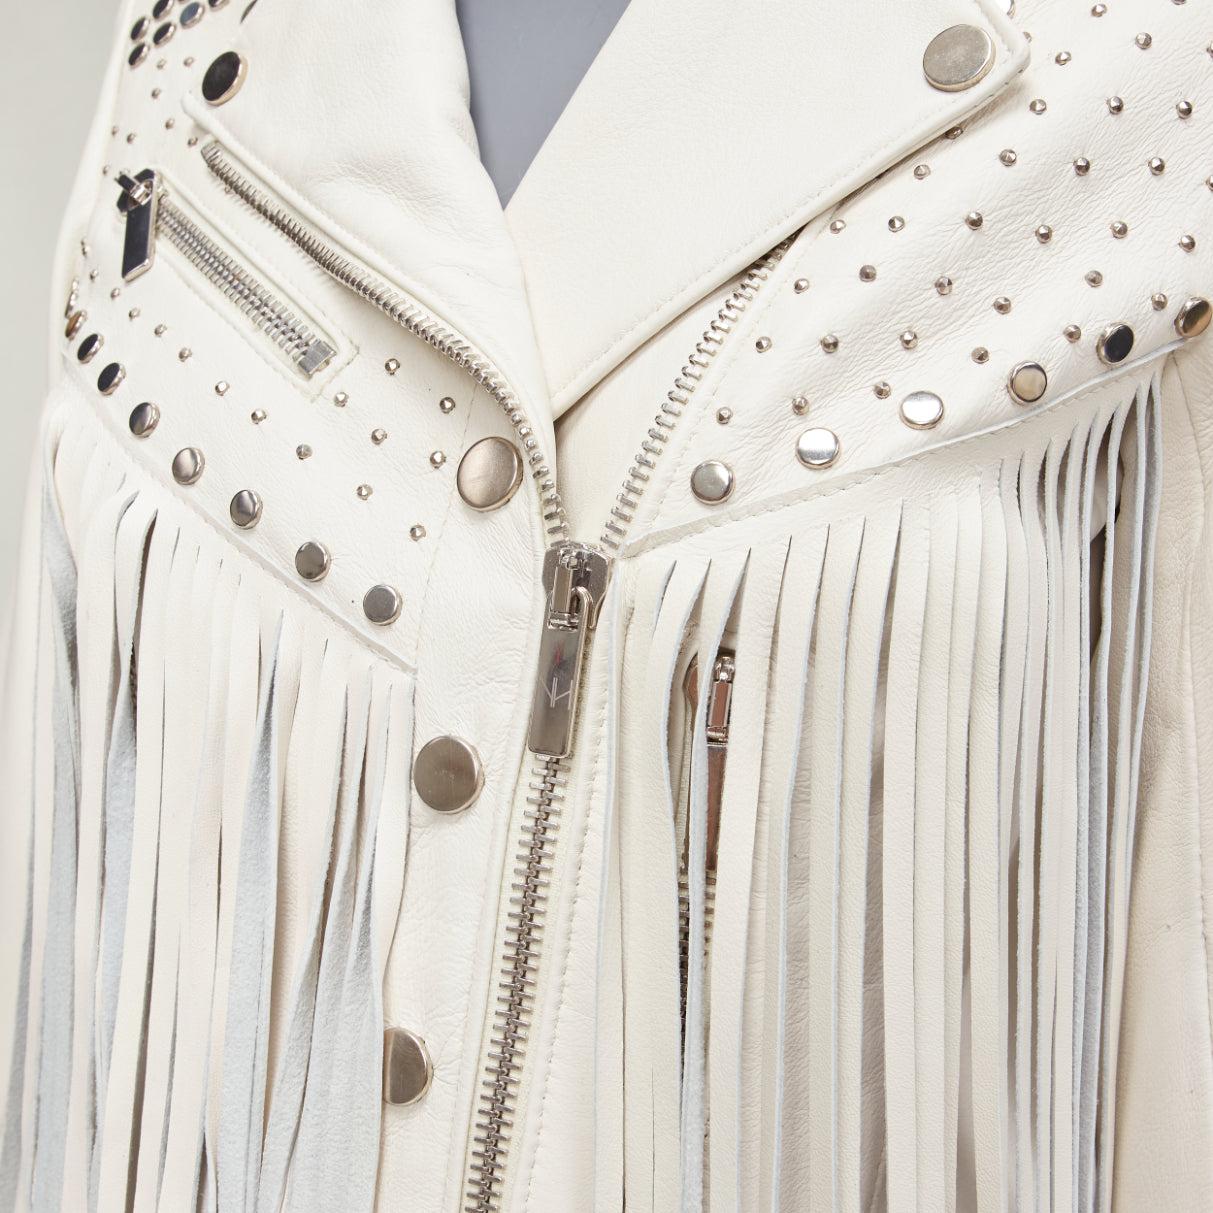 NOUR HAMMOUR cream lambskin fringe silver studs western biker jacket FR34 XS
Reference: AAWC/A00723
Brand: Nour Hammour
Material: Lambskin Leather
Color: Cream, Silver
Pattern: Solid
Closure: Zip
Lining: Black Fabric
Extra Details: Silver studs at